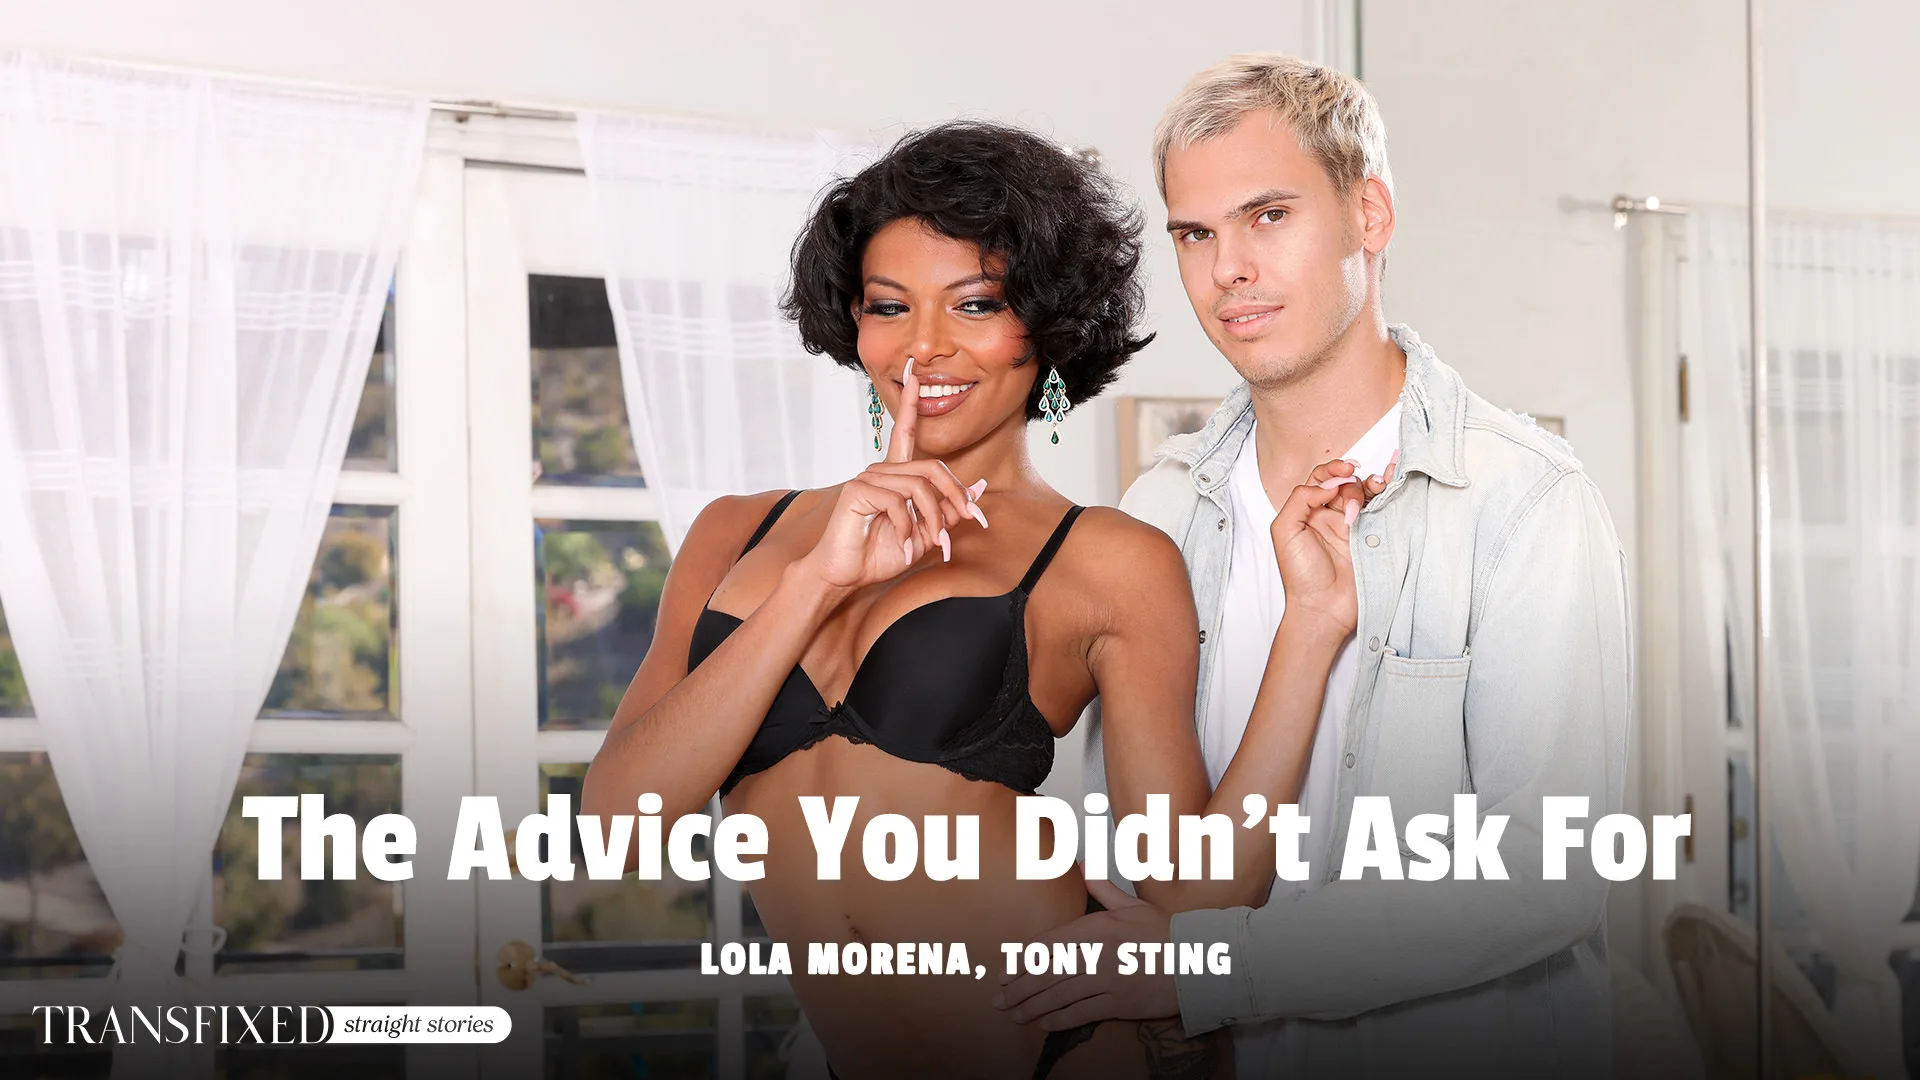 The Advice You Didn't Ask For - Transfixed